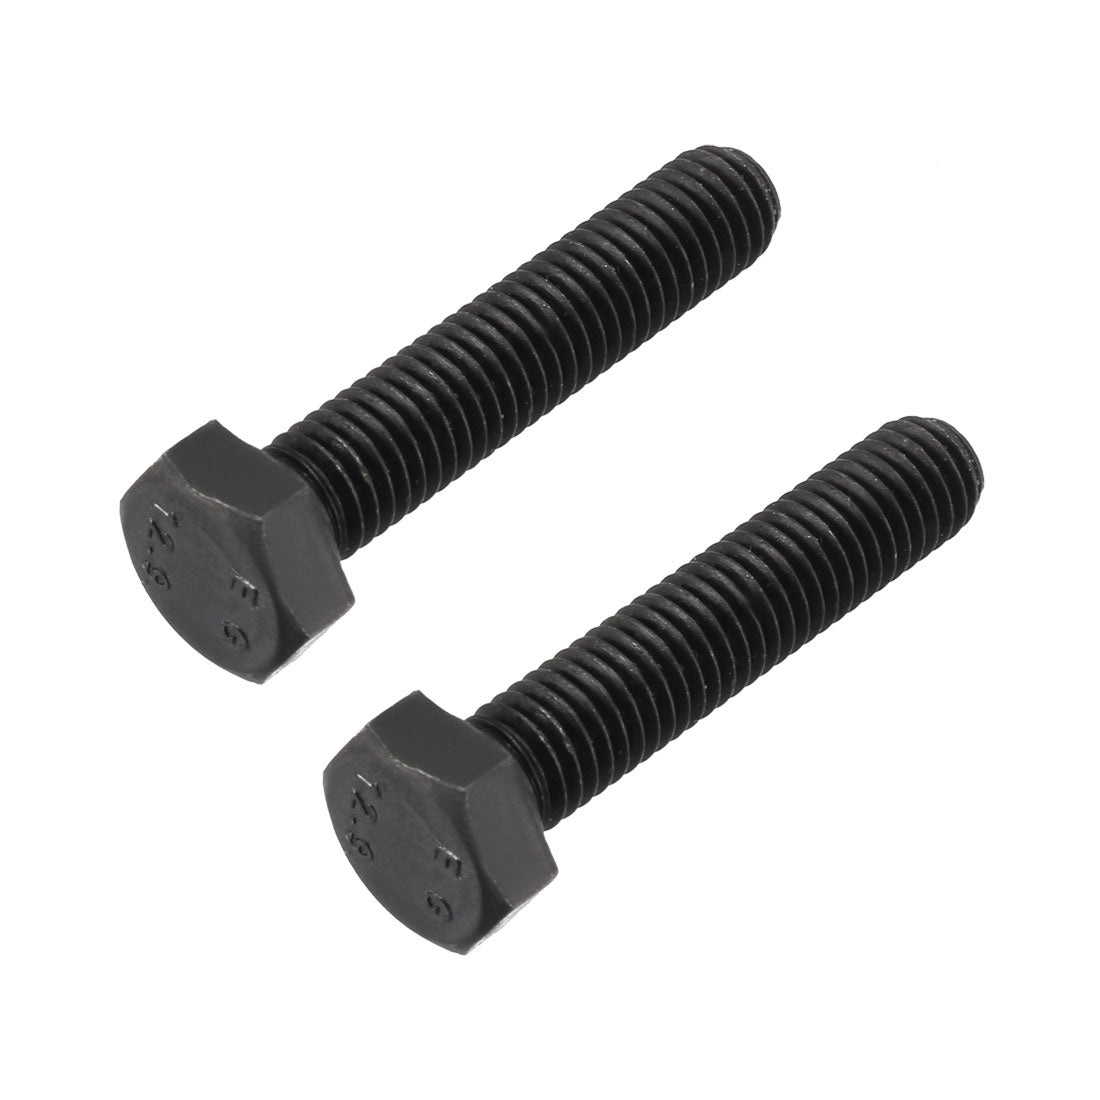 uxcell Uxcell M8x40 mm Hex Head Left Hand Screw Bolts Fastener Carbon Steel Black 2pcs